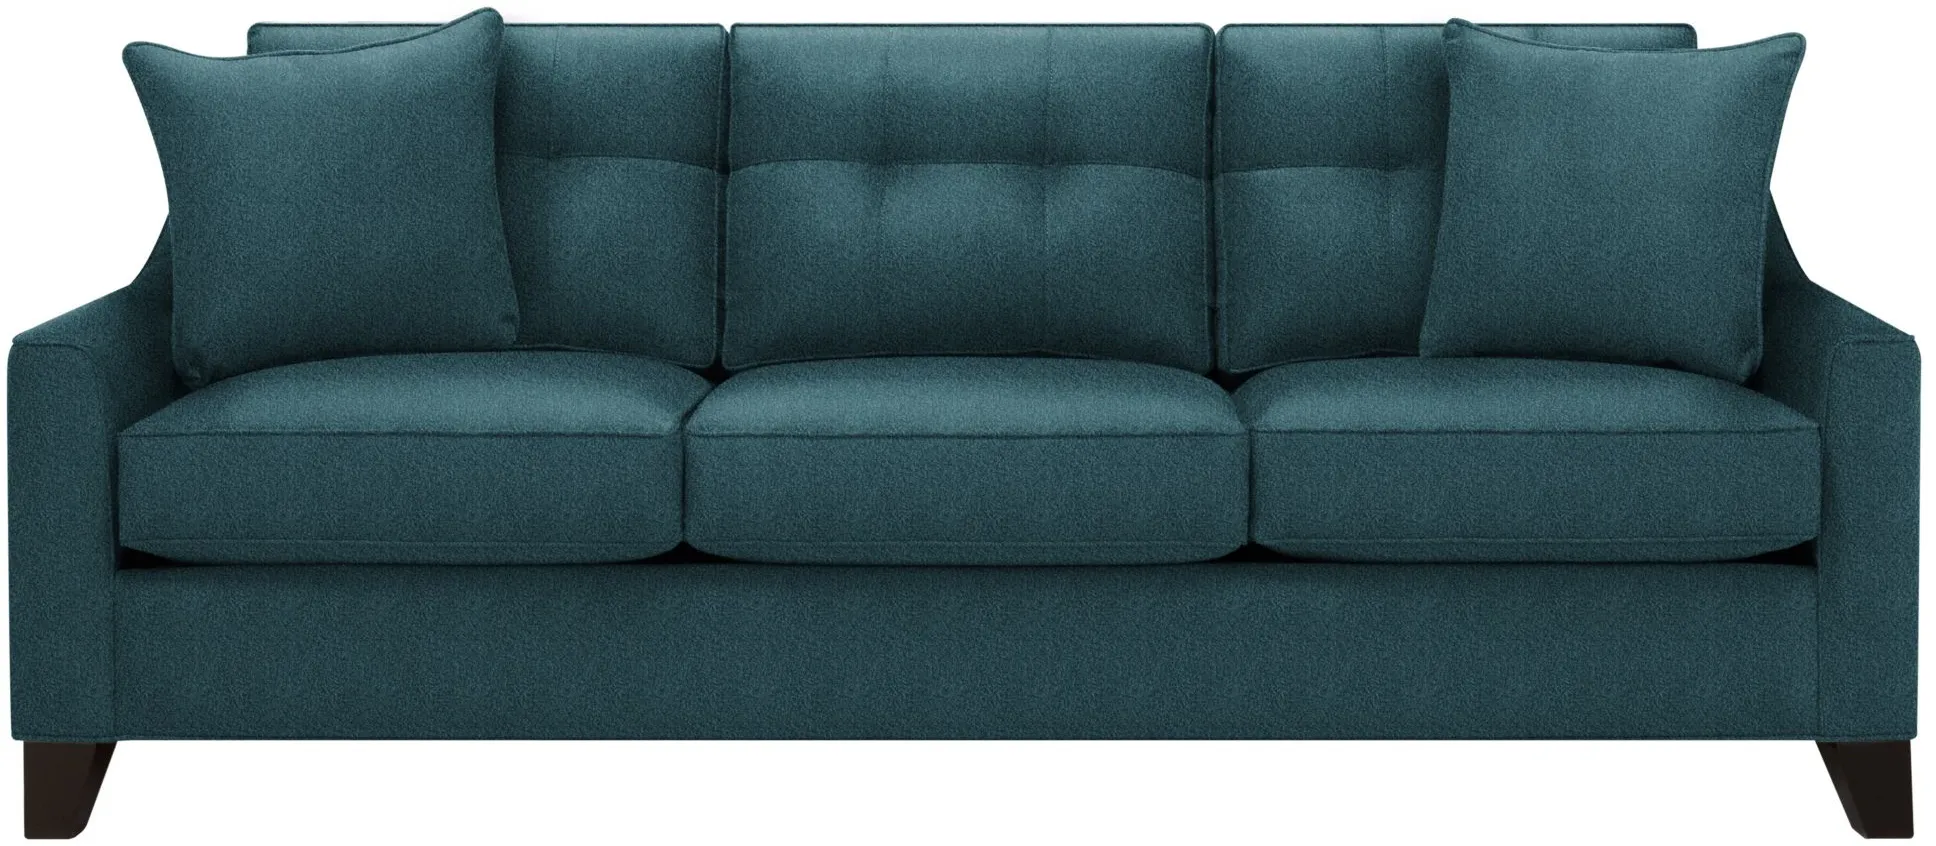 Carmine Sofa in Suede so Soft Lagoon by H.M. Richards